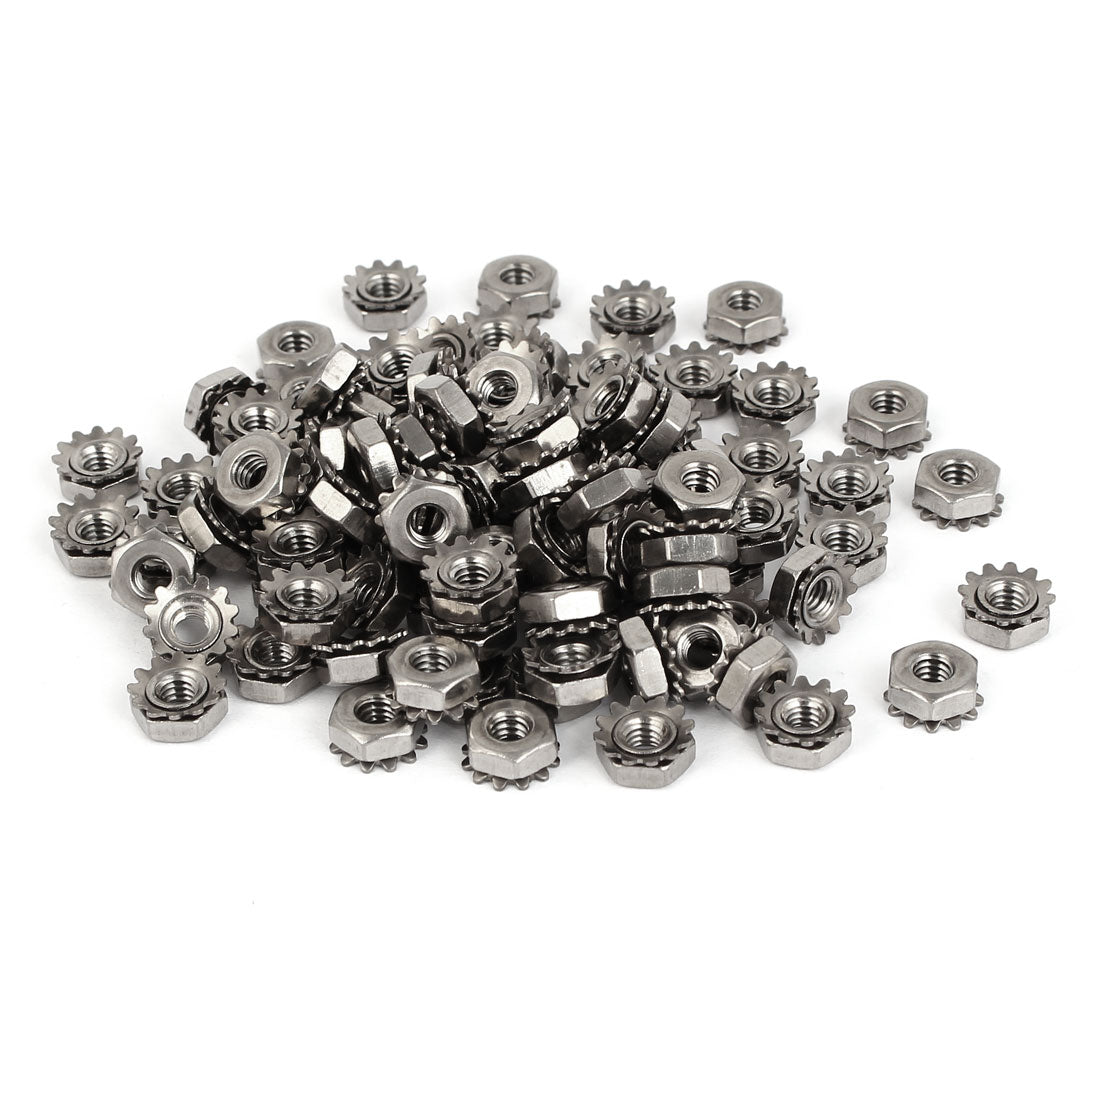 uxcell Uxcell 8#-32 304 Stainless Steel Female Thread Kep Hex Head Lock Nut 100pcs